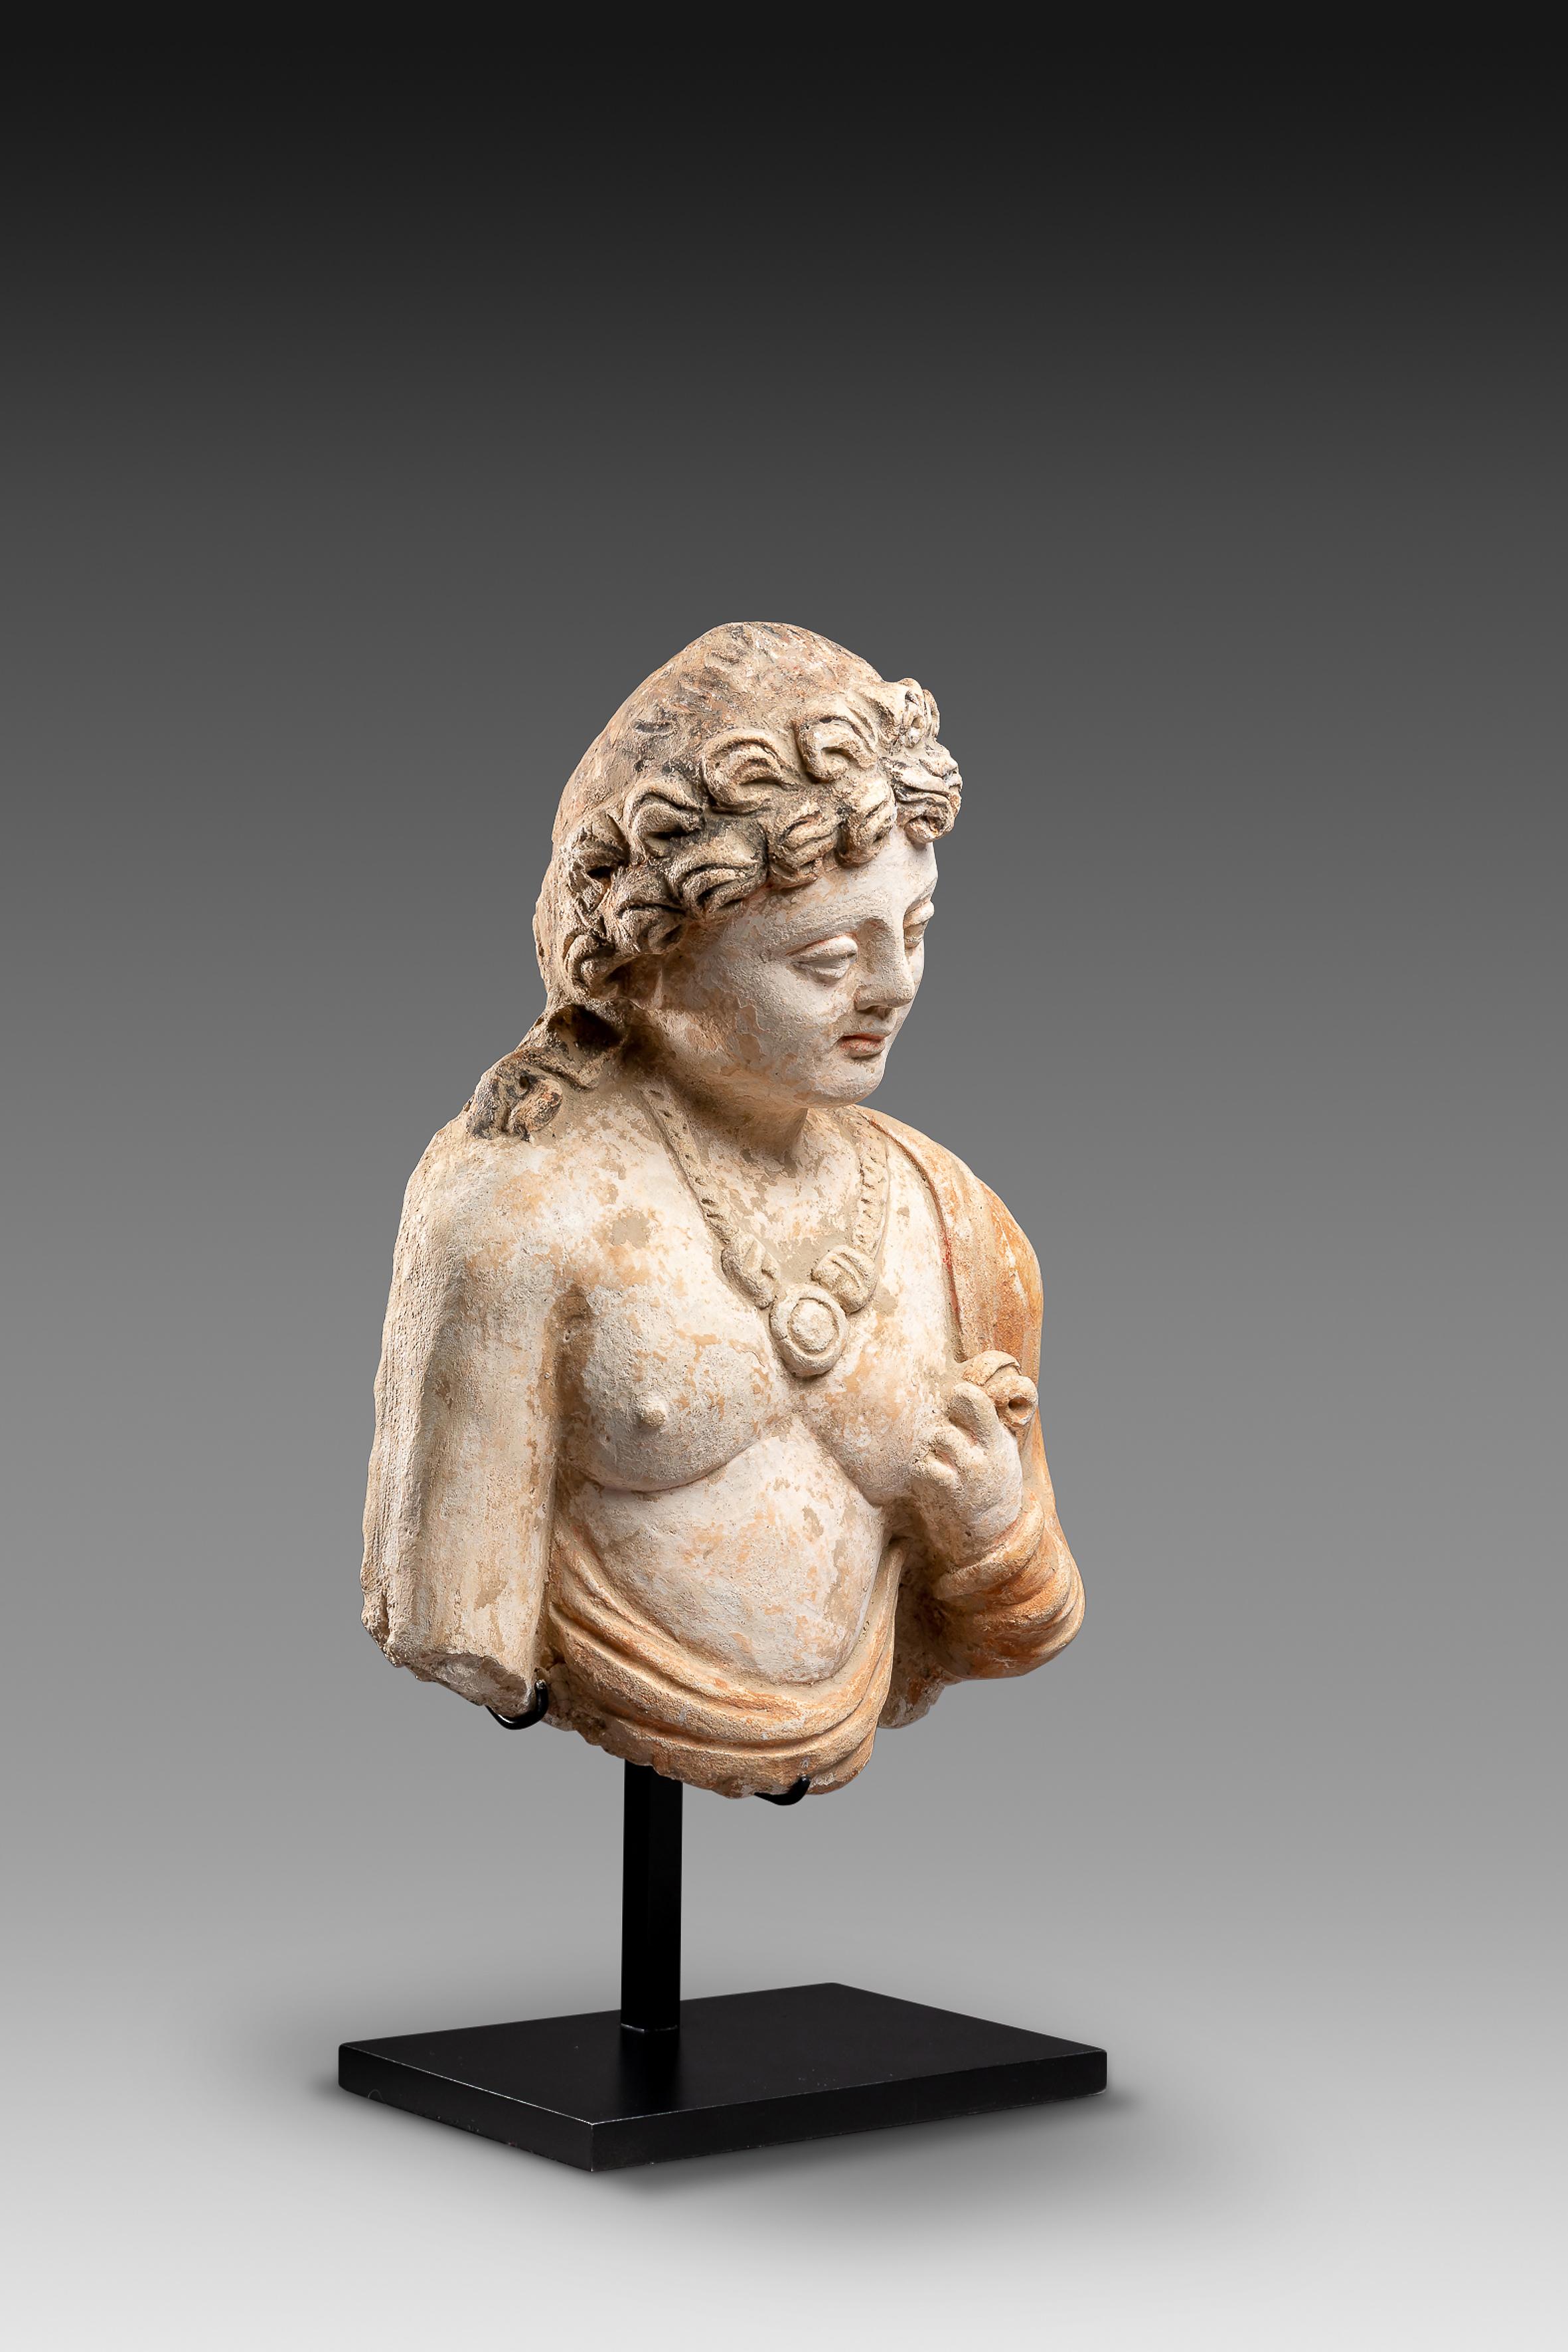 Gandhara Art

The childish looking face with round cheeks and luscious lips is marked by a sweet melancholic expression which we can recognize, in a Buddhist context, an infinite sadness given the human condition, as well as the profound devotion